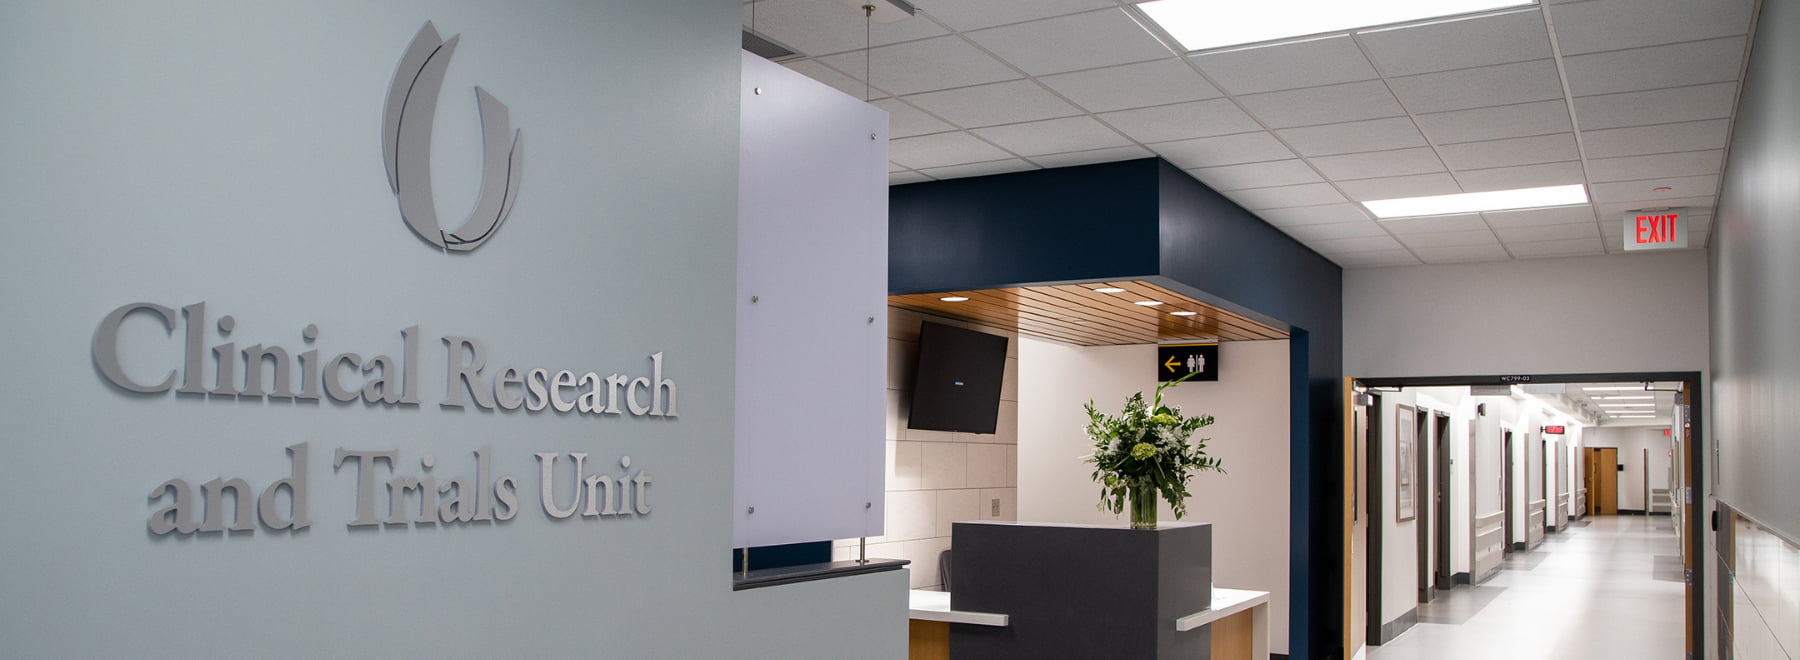 Clinical Research and Trials Unit